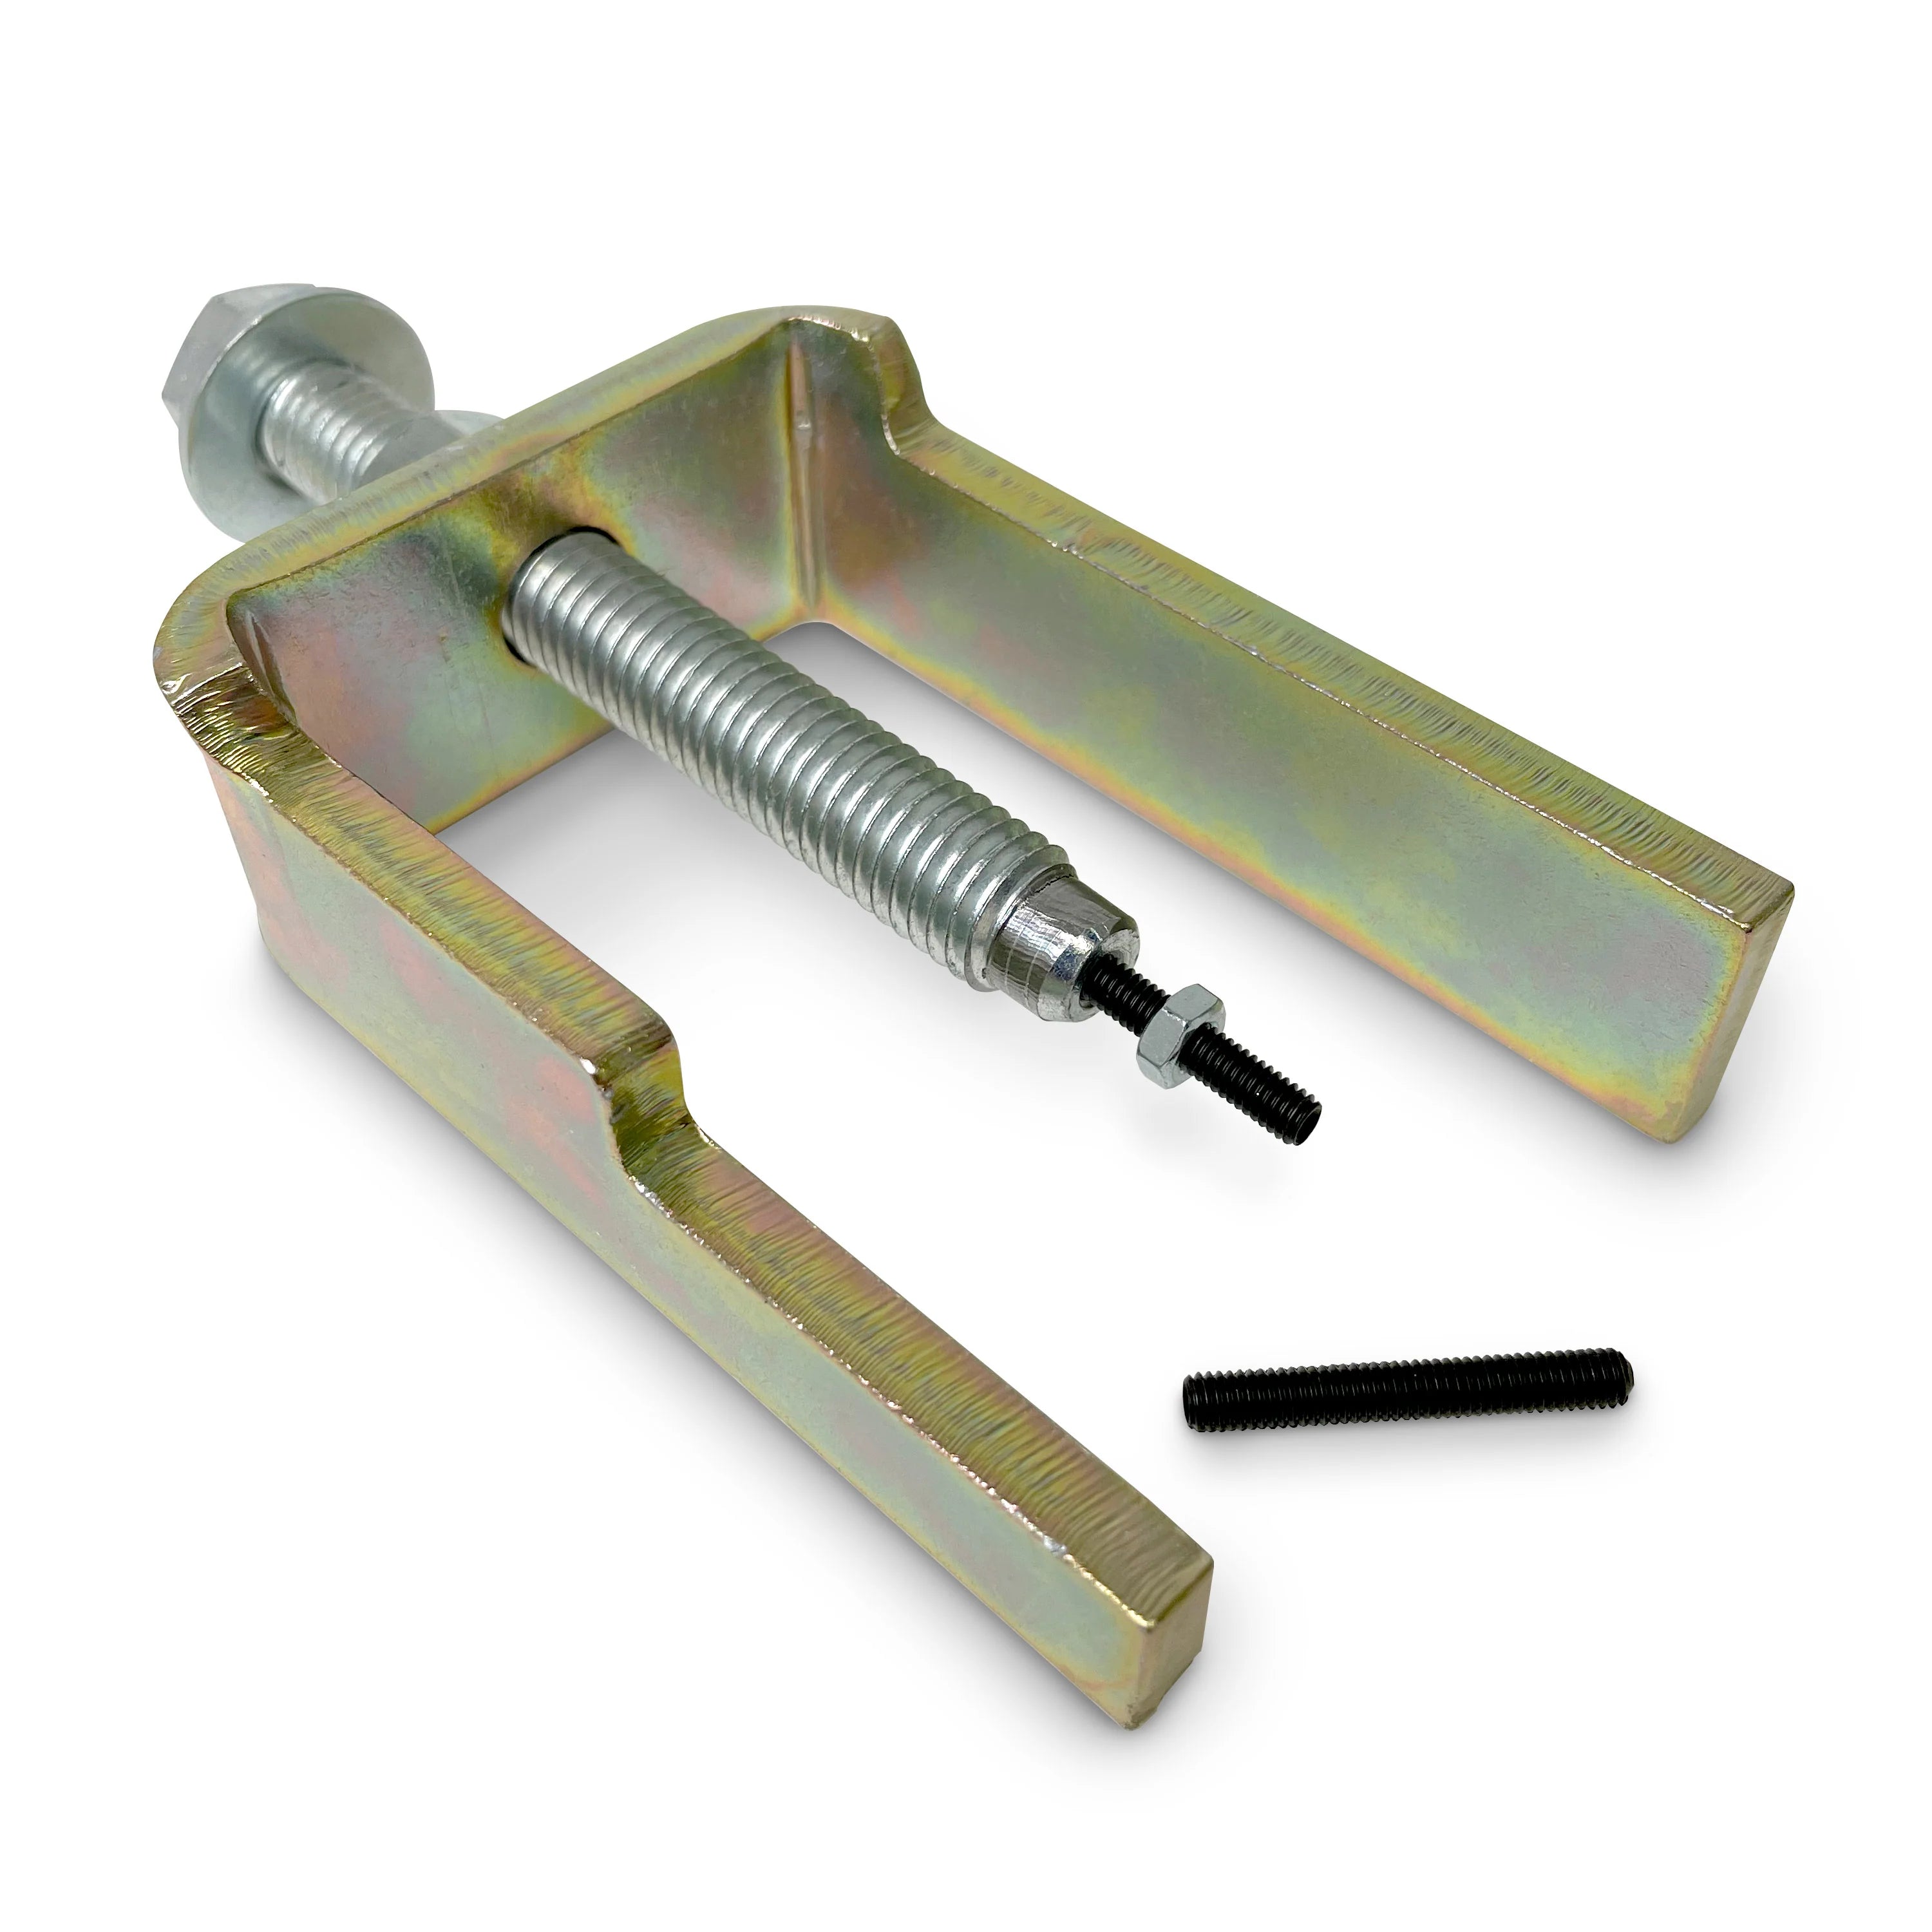 X3 Secondary Clutch Roller Pin Puller